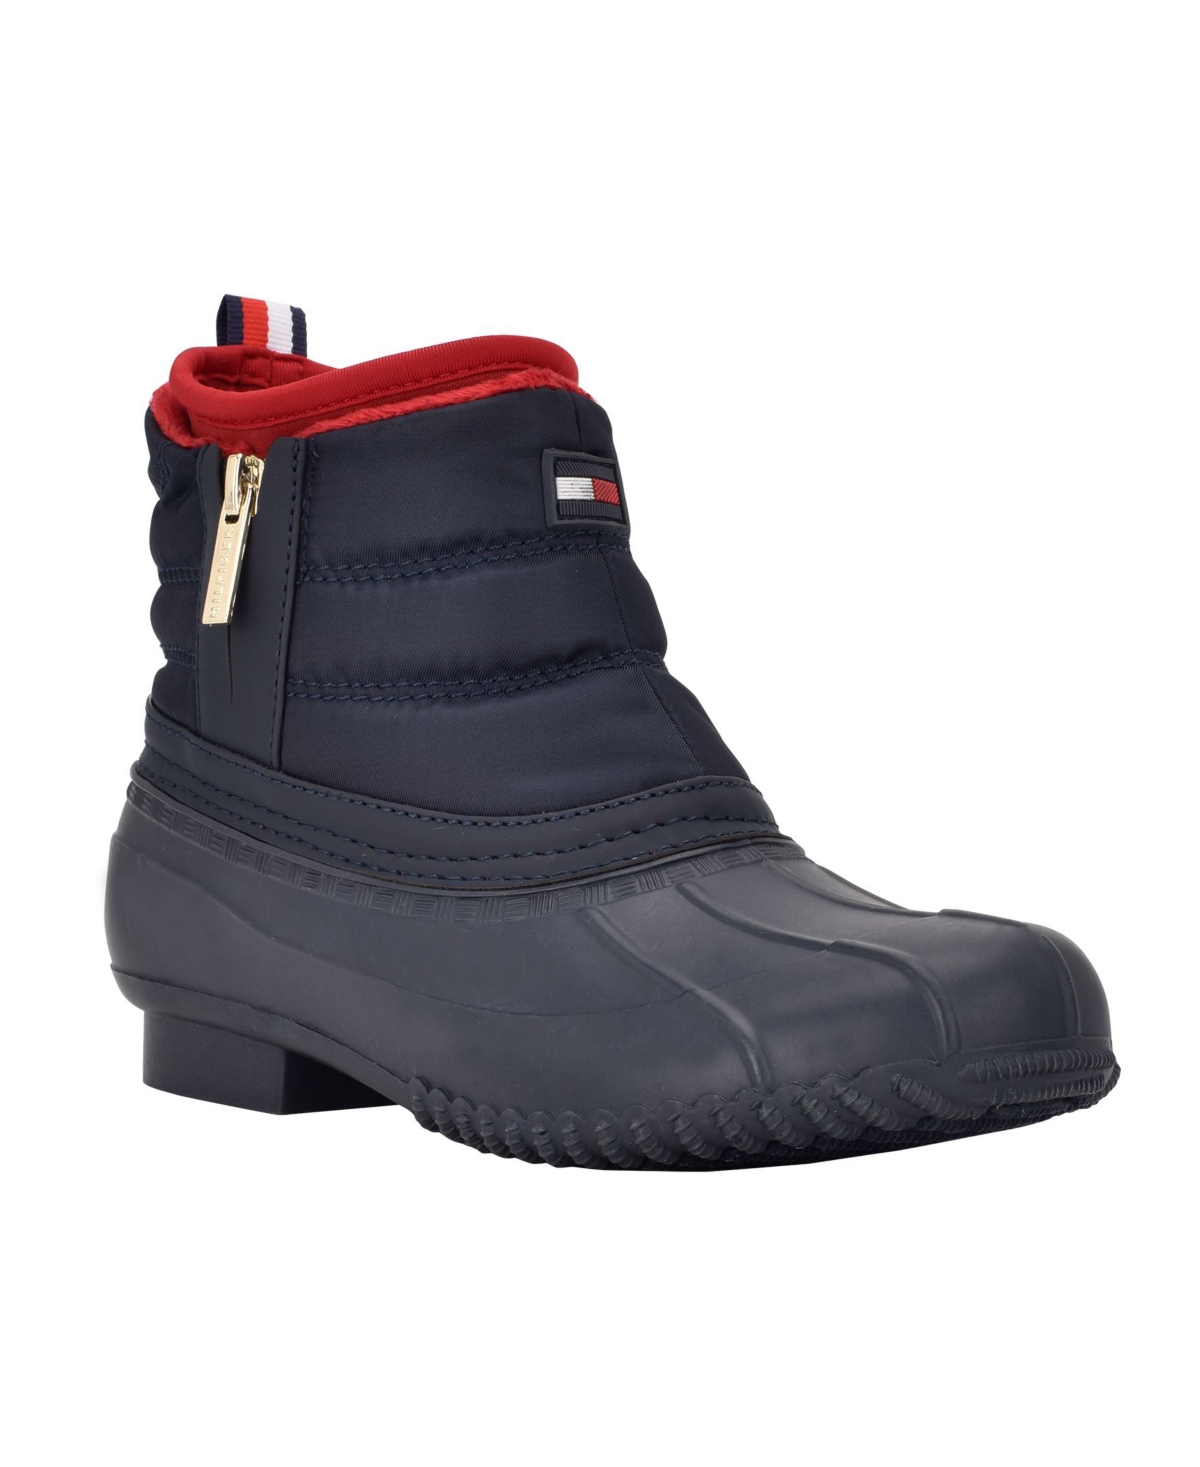 UPC 195972717930 product image for Tommy Hilfiger Women's Roana Zip Up Duck Booties Women's Shoes | upcitemdb.com